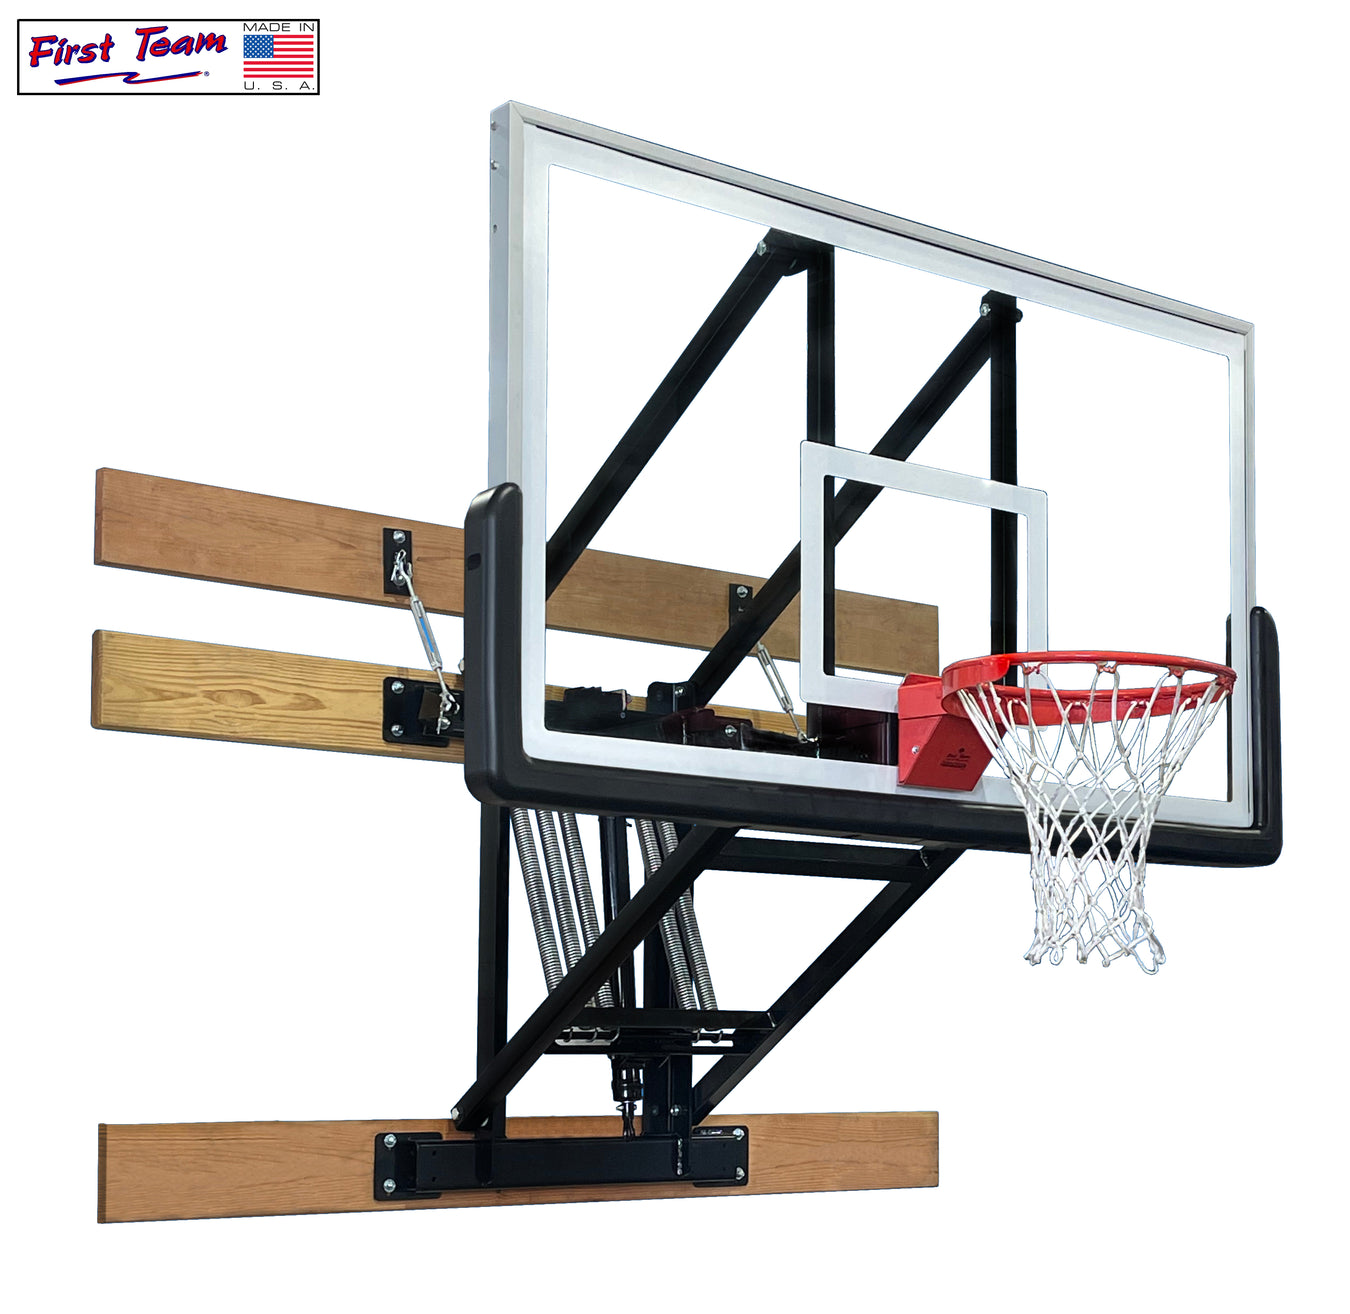 First Team Wall Mount Basketball Systems